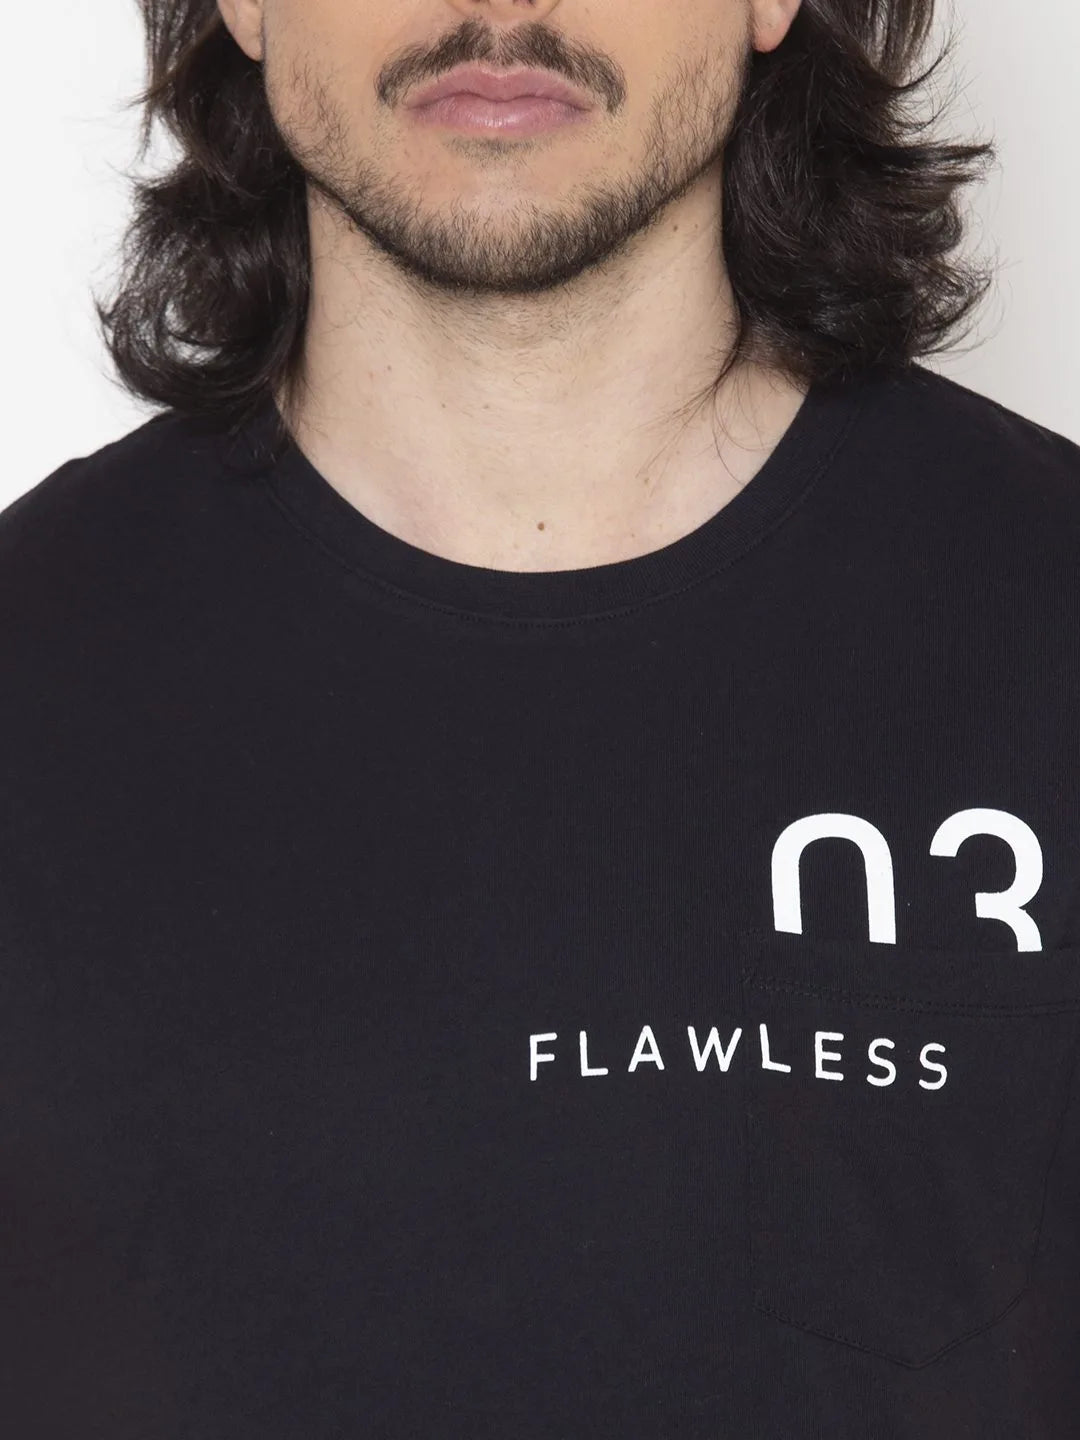 Graphic Black Men T-shirt Being Flawless